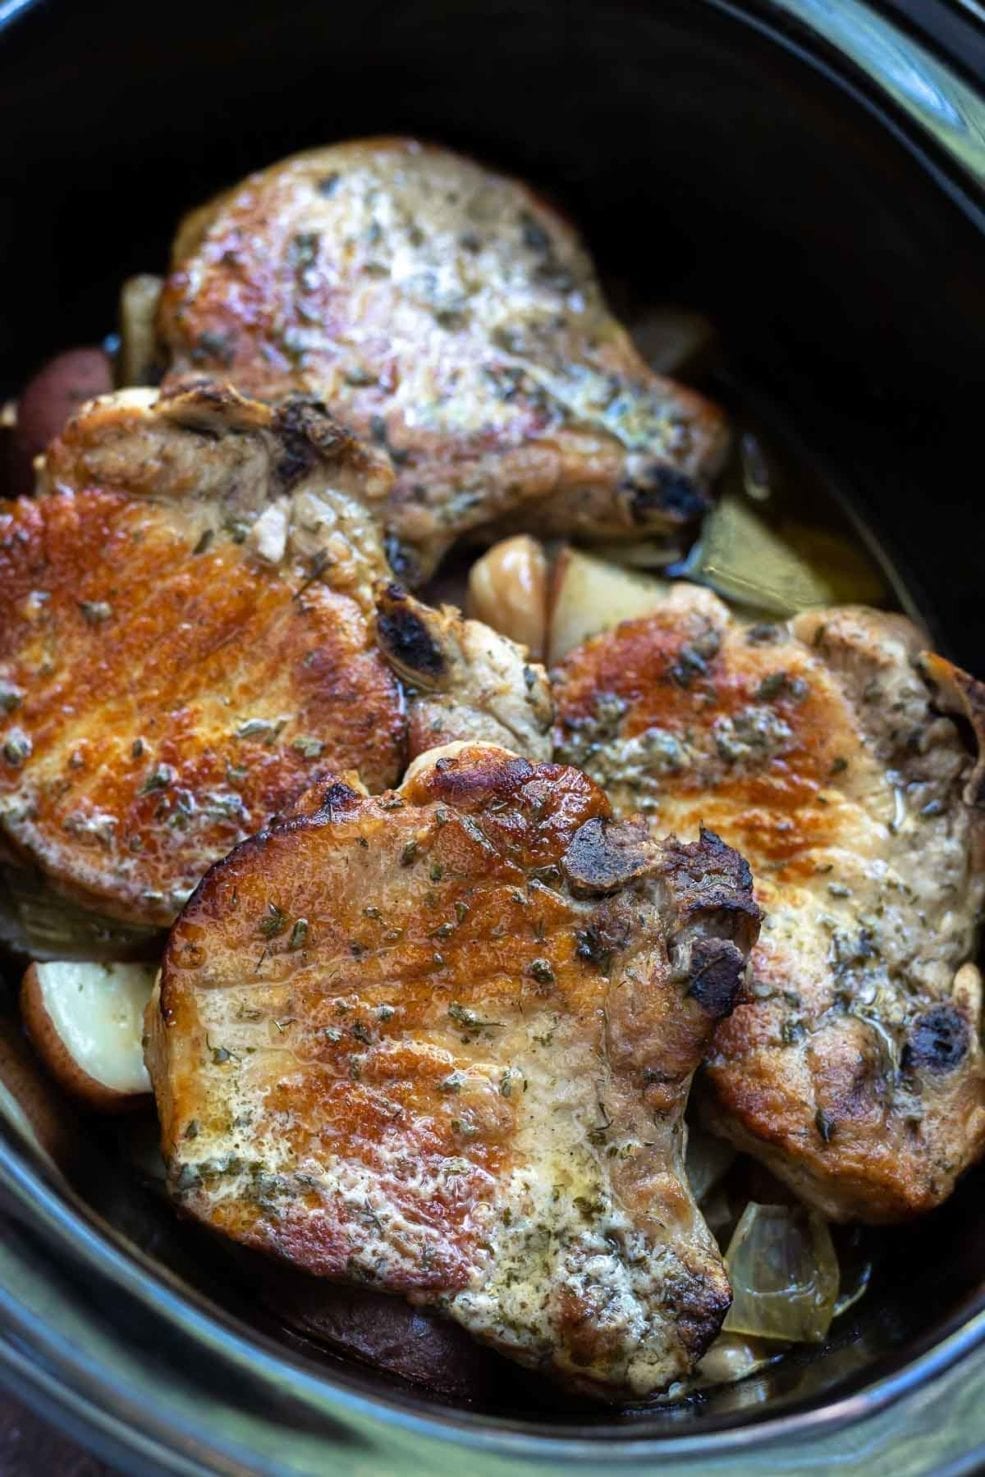 Slow Cooker Herbed Pork Chops and Potatoes - The Magical Slow Cooker